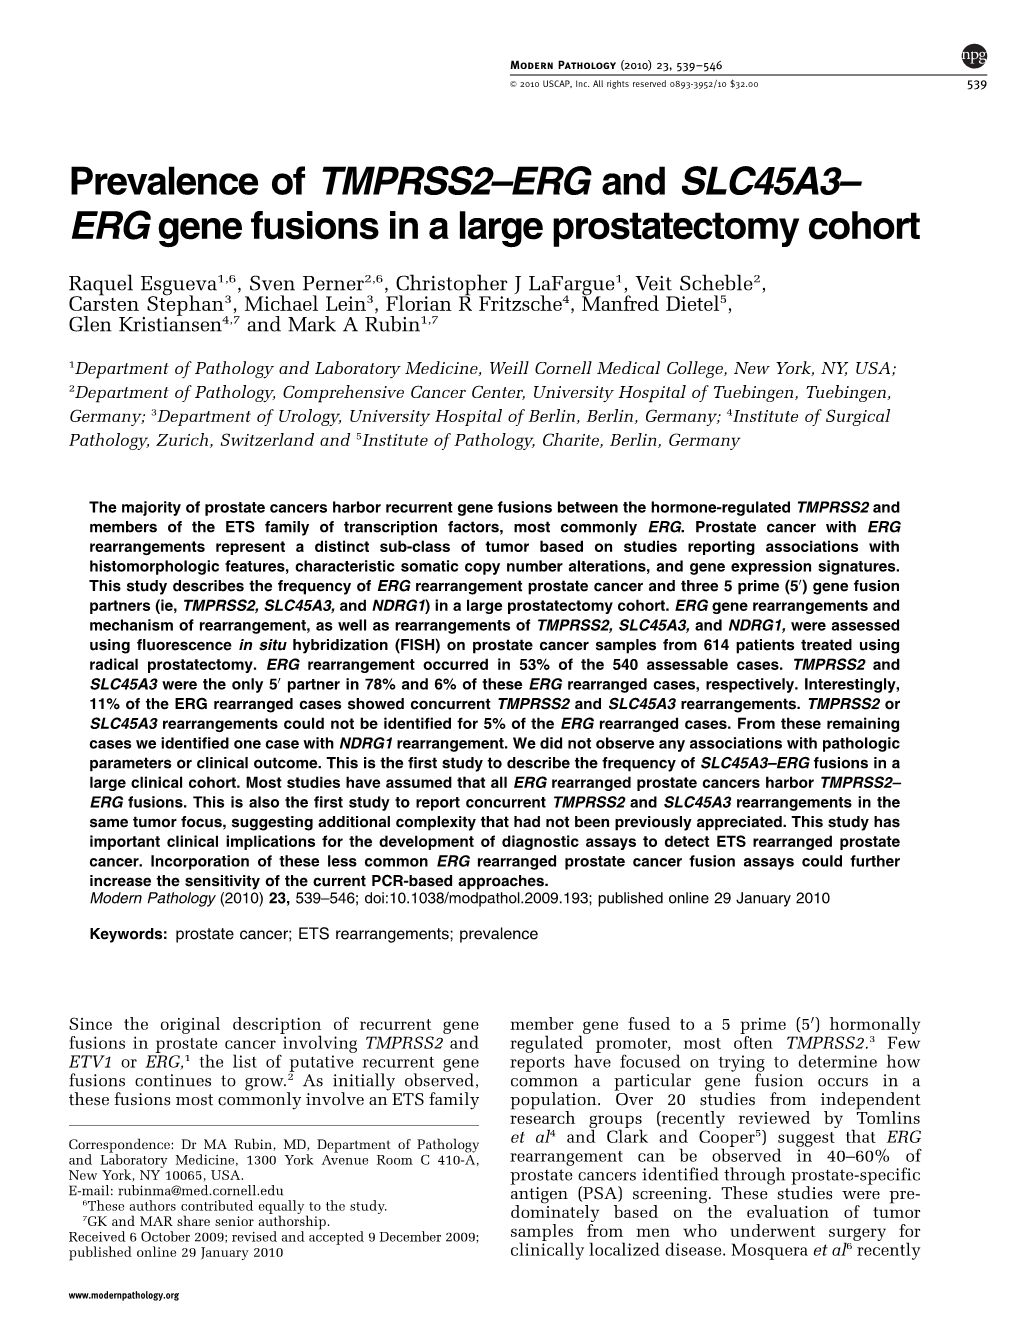 ERG Gene Fusions in a Large Prostatectomy Cohort